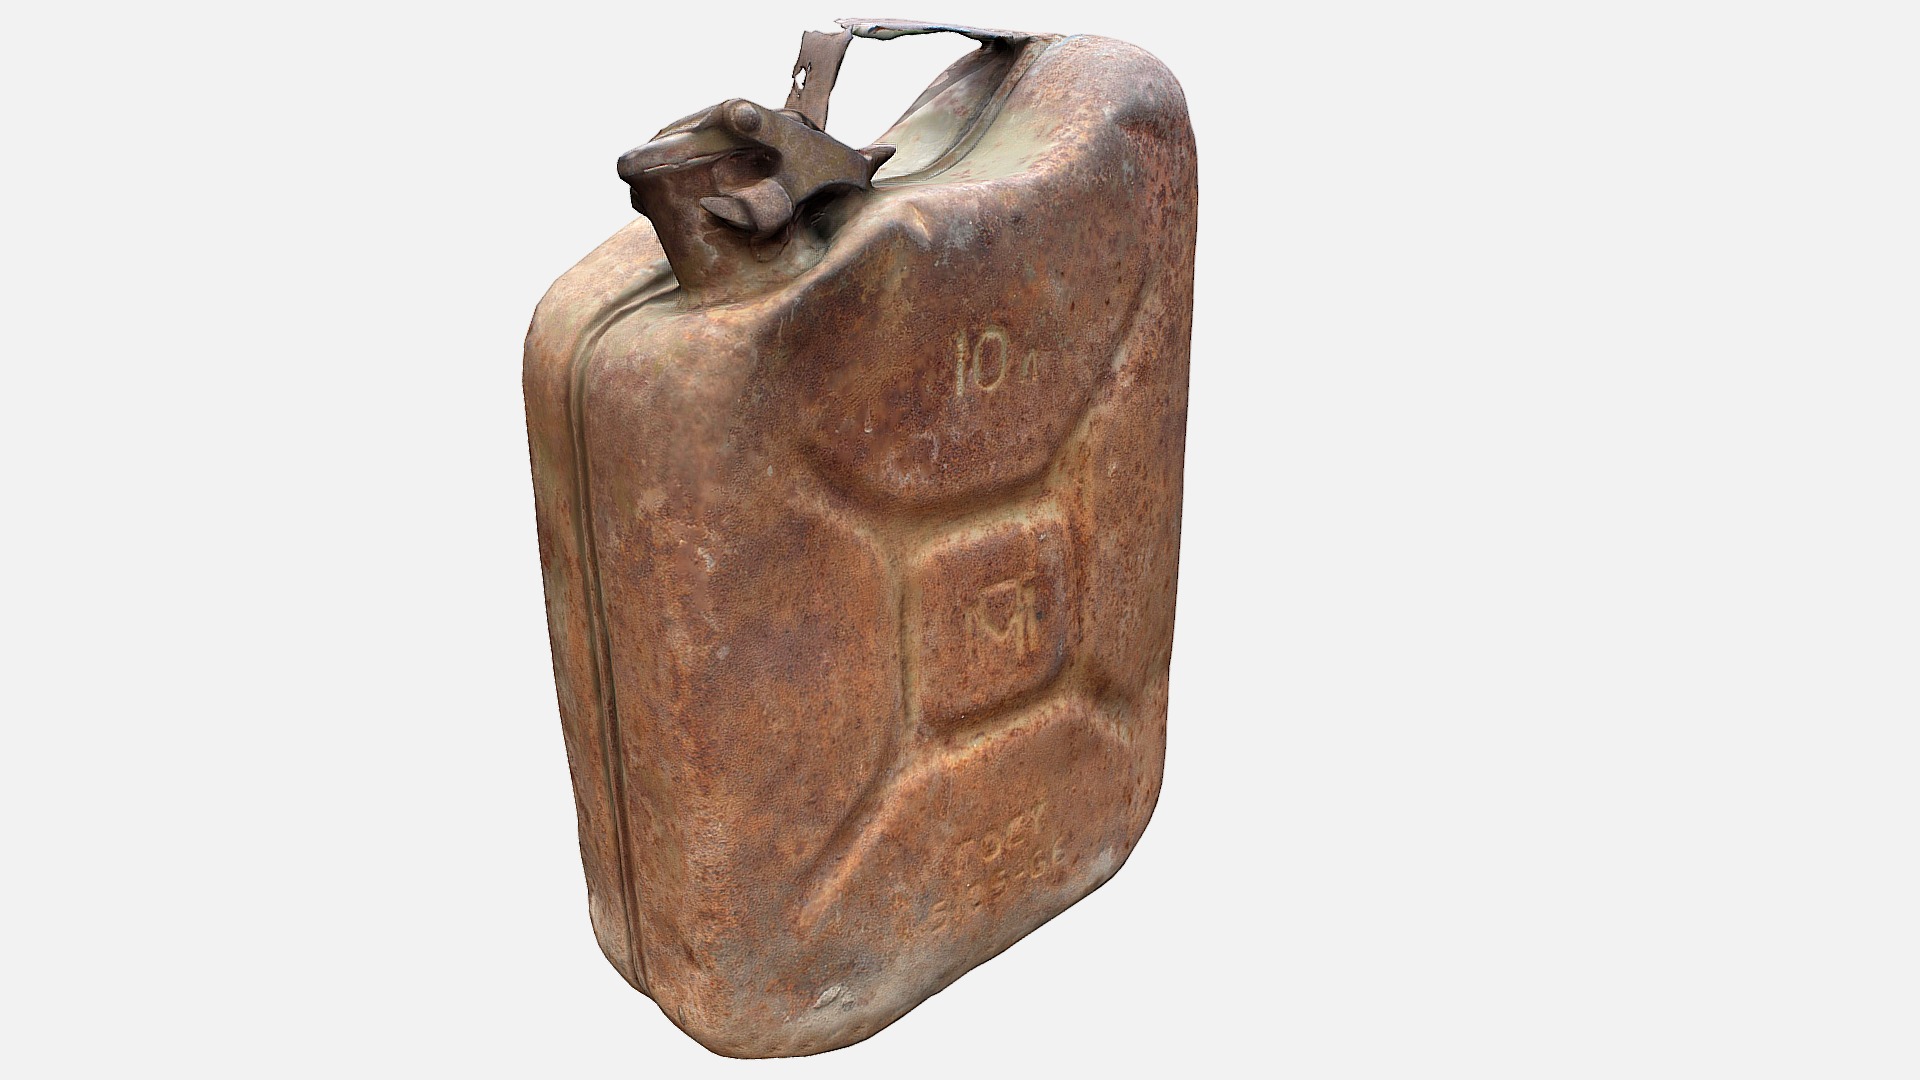 3D model Old Green Rusty Gasoline Canister - This is a 3D model of the Old Green Rusty Gasoline Canister. The 3D model is about a brown leather boot.